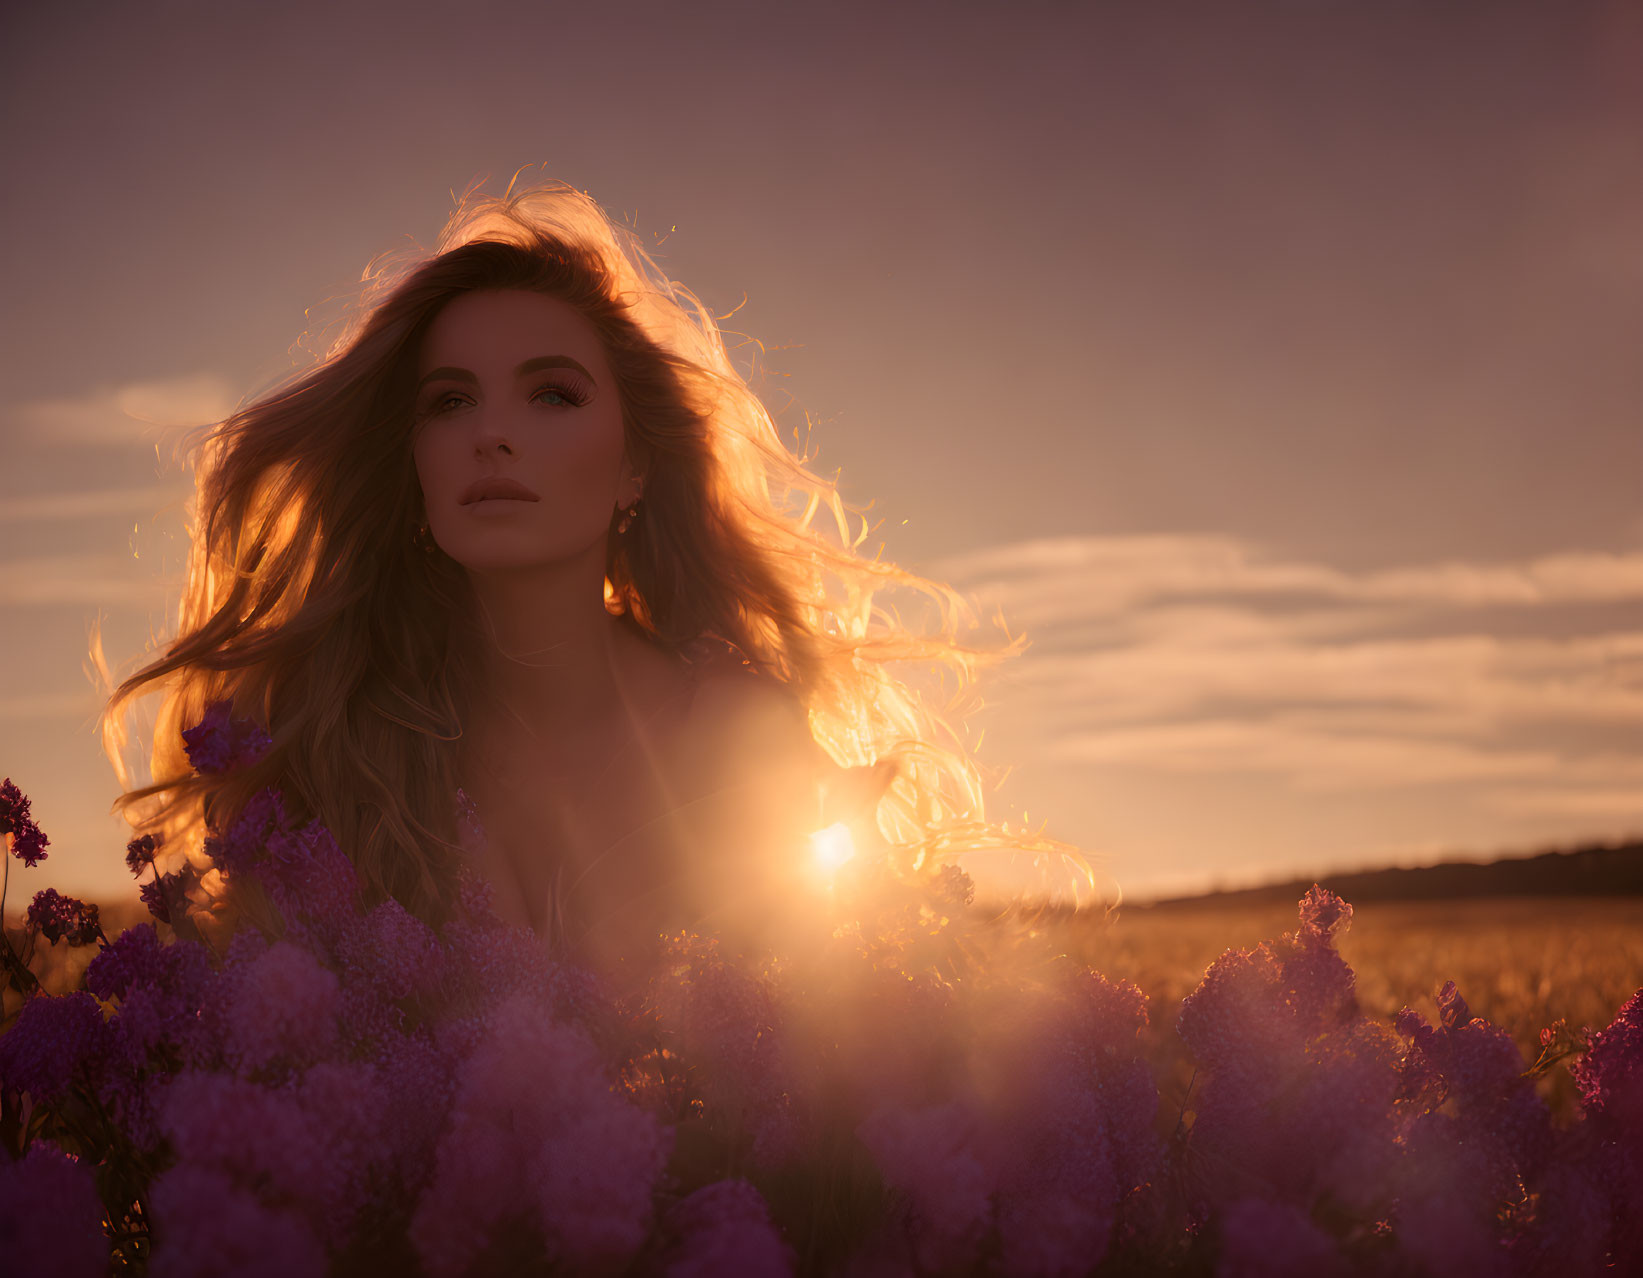 Woman in Flower Field at Sunset with Illuminated Hair